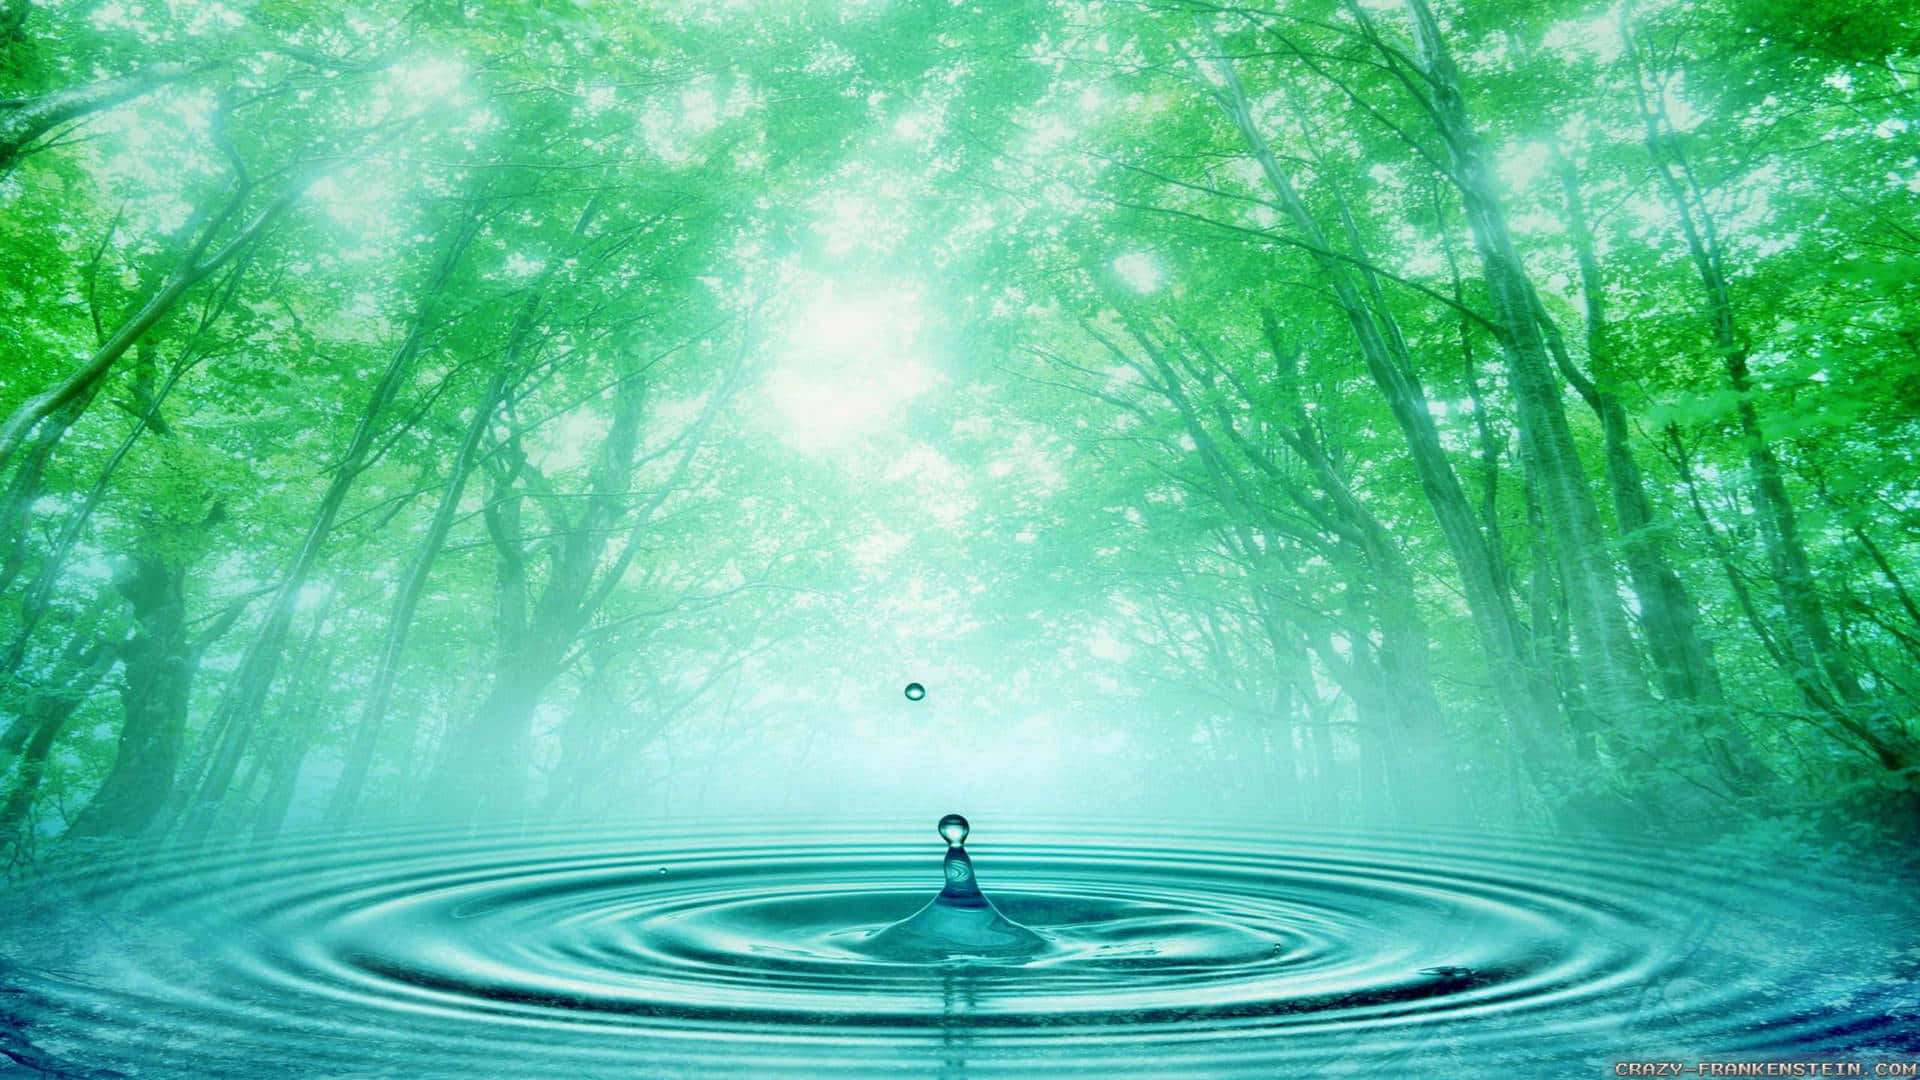 Enchanted Forest Water Drop Wallpaper